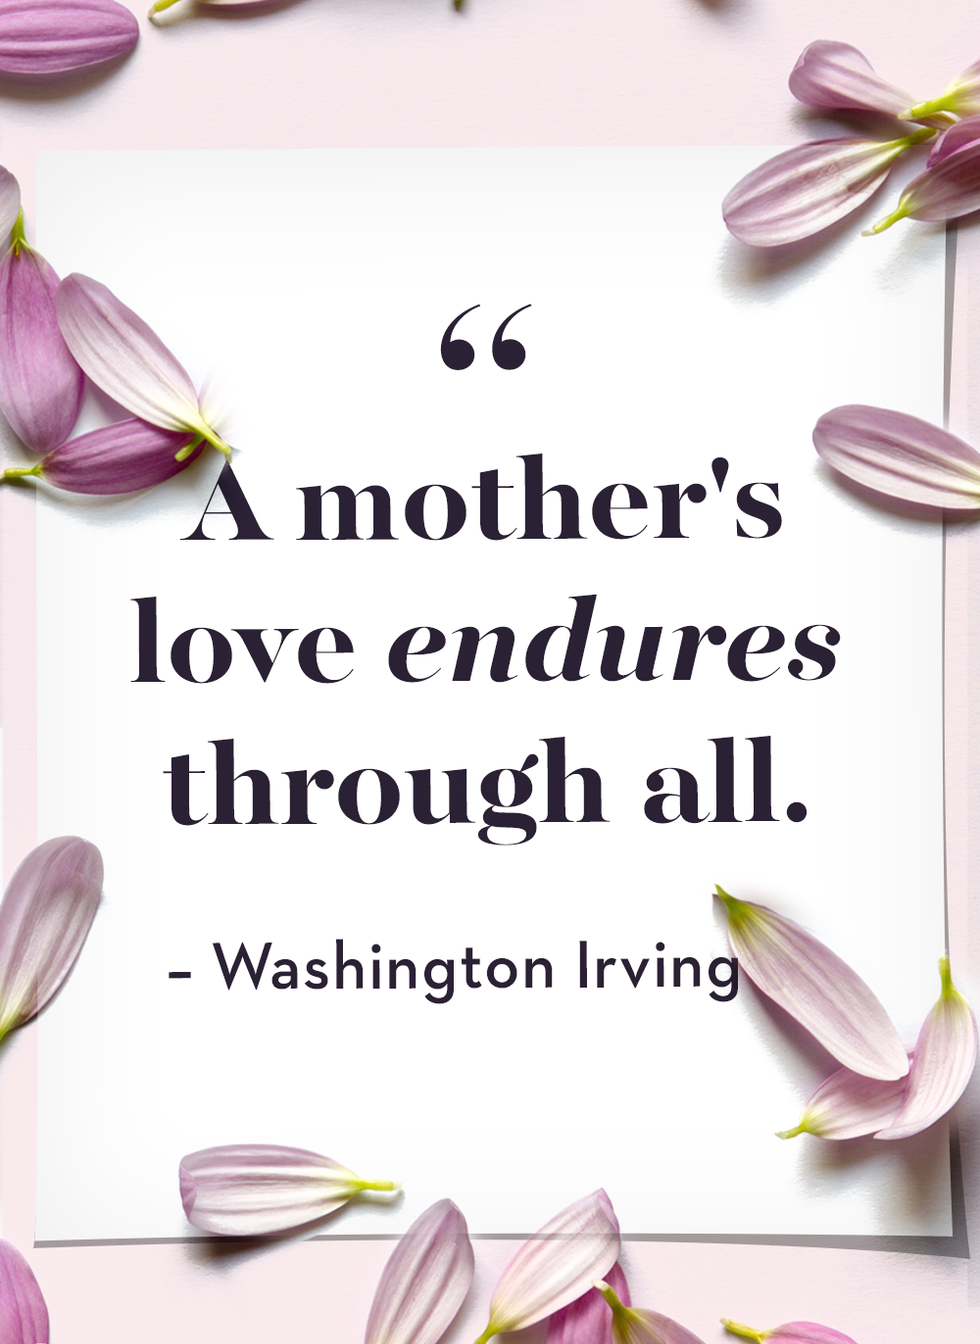 Mothers Day Message Mother S Day Messages That Will Inspire You | Hot ...